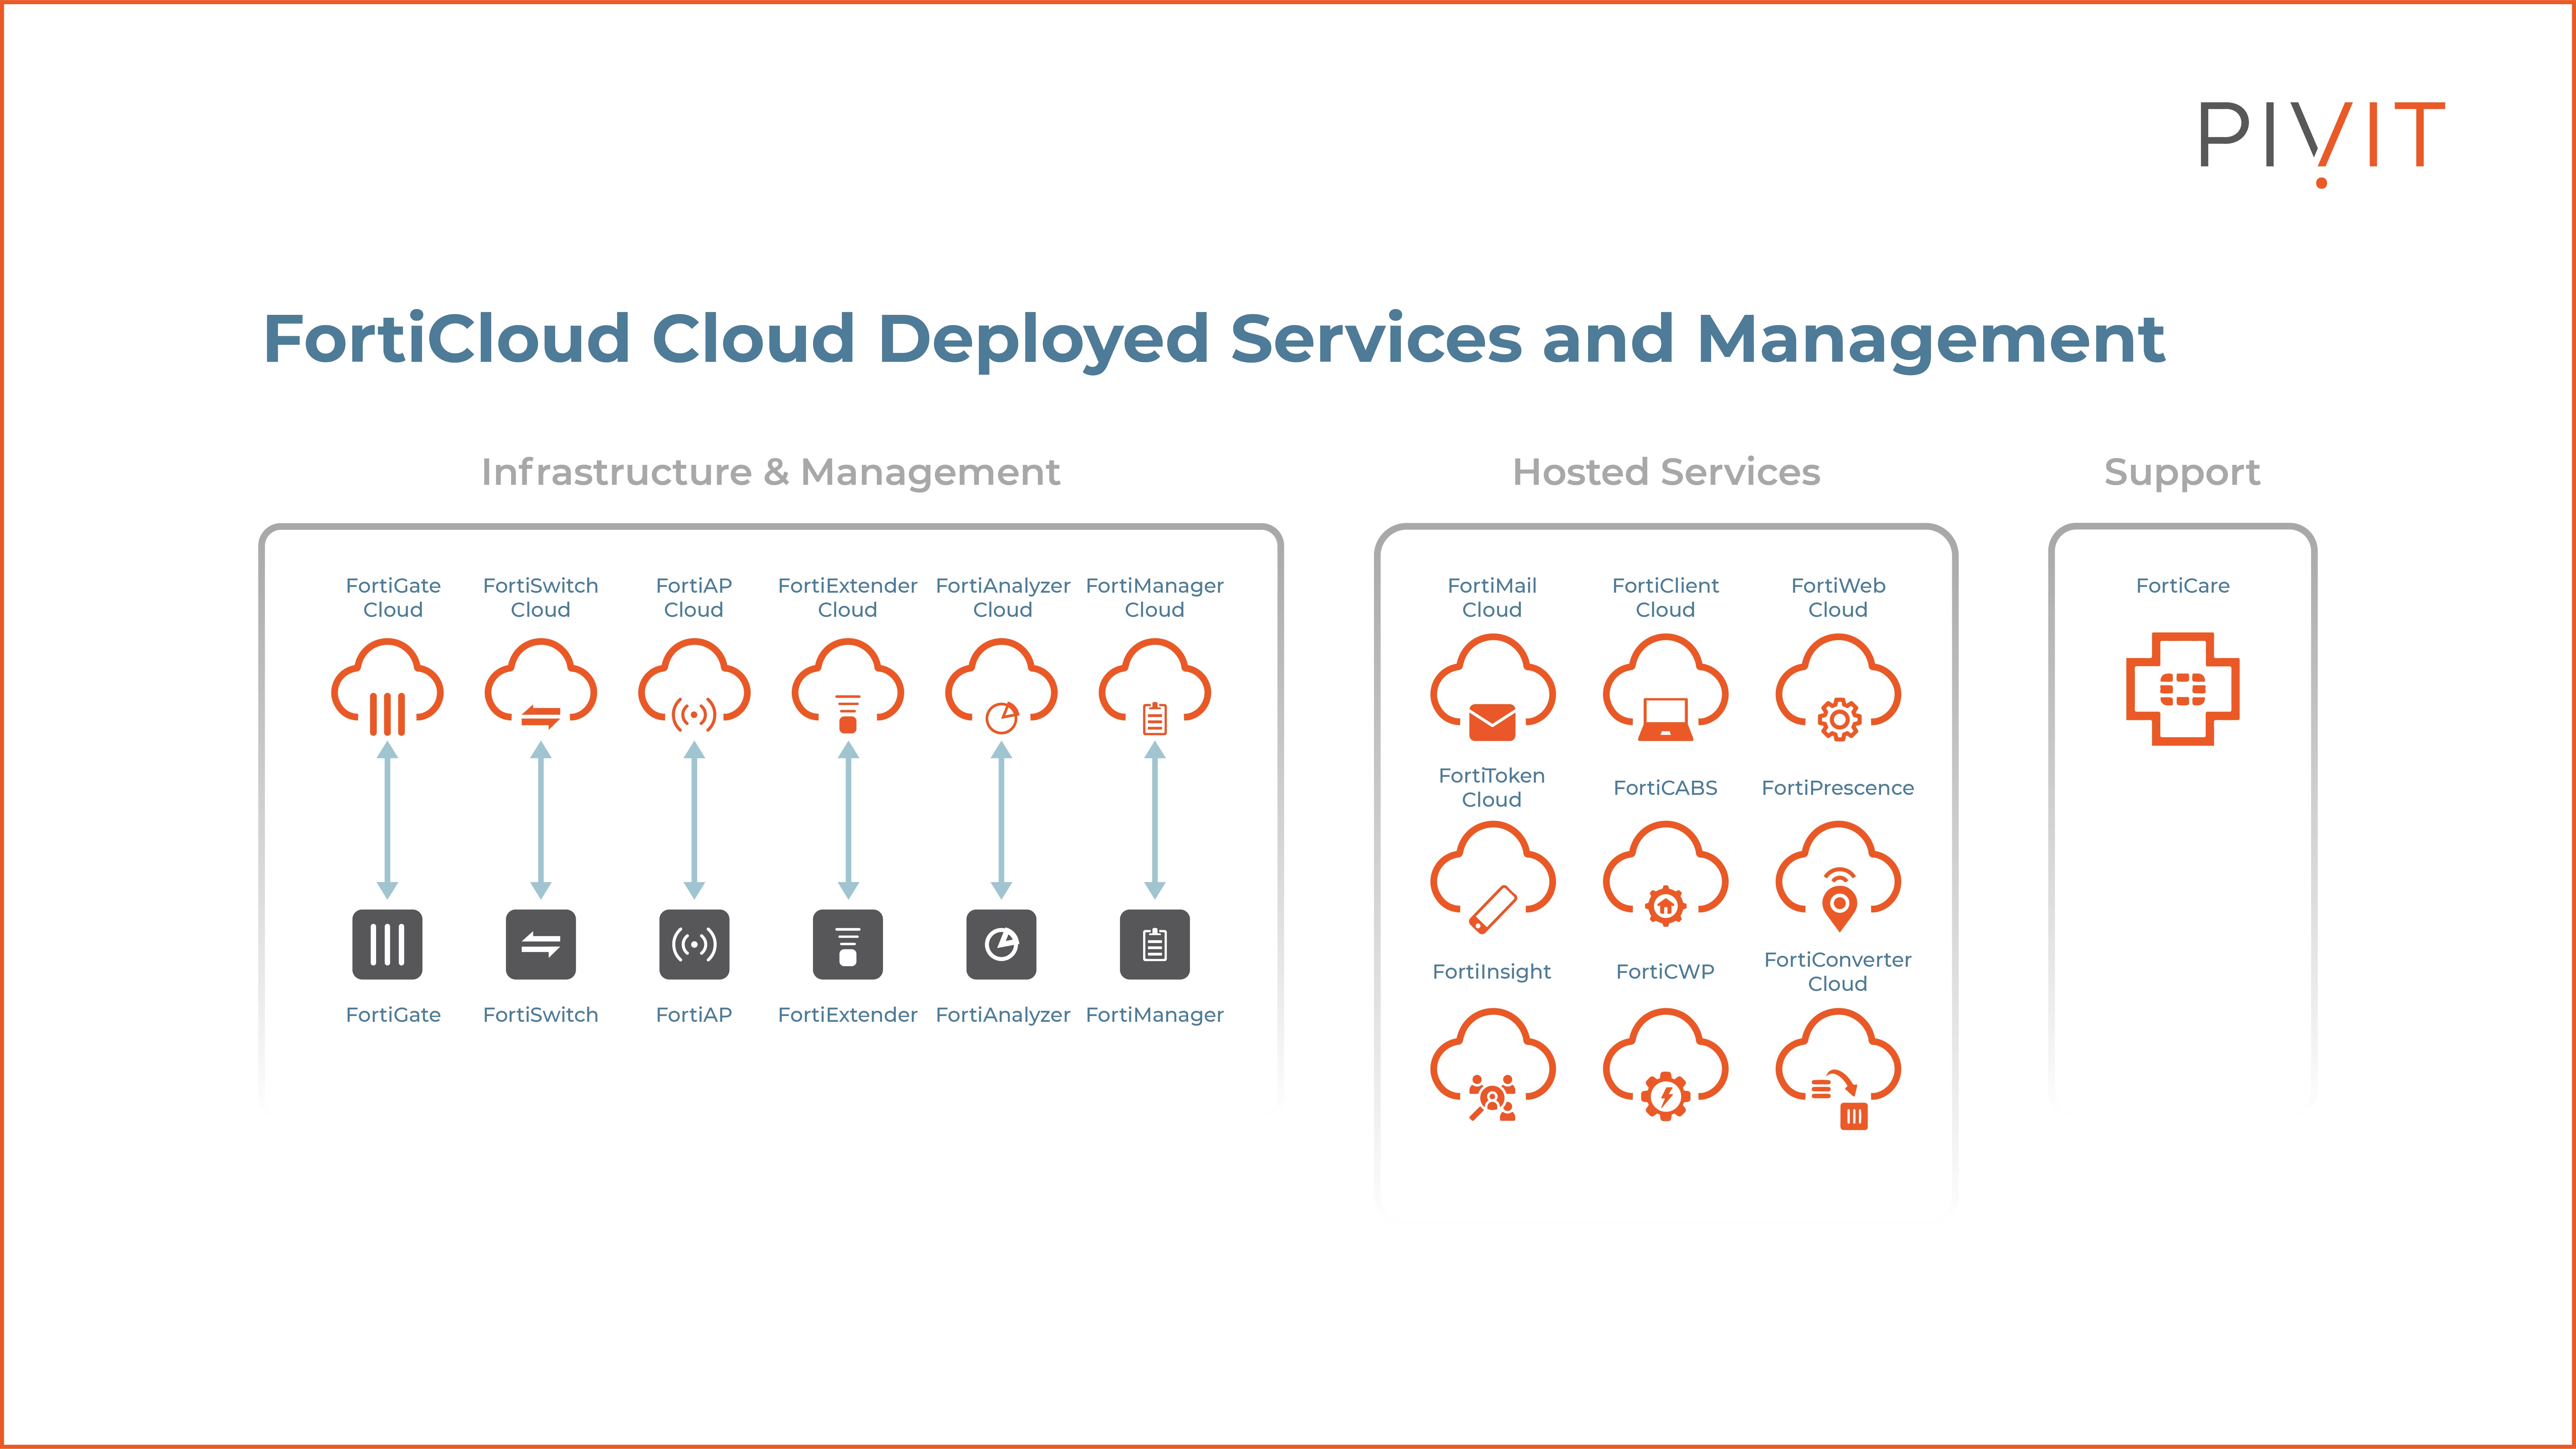 FortiCloud cloud-deployed services and management, including infrastructure and management, hosted services, and support